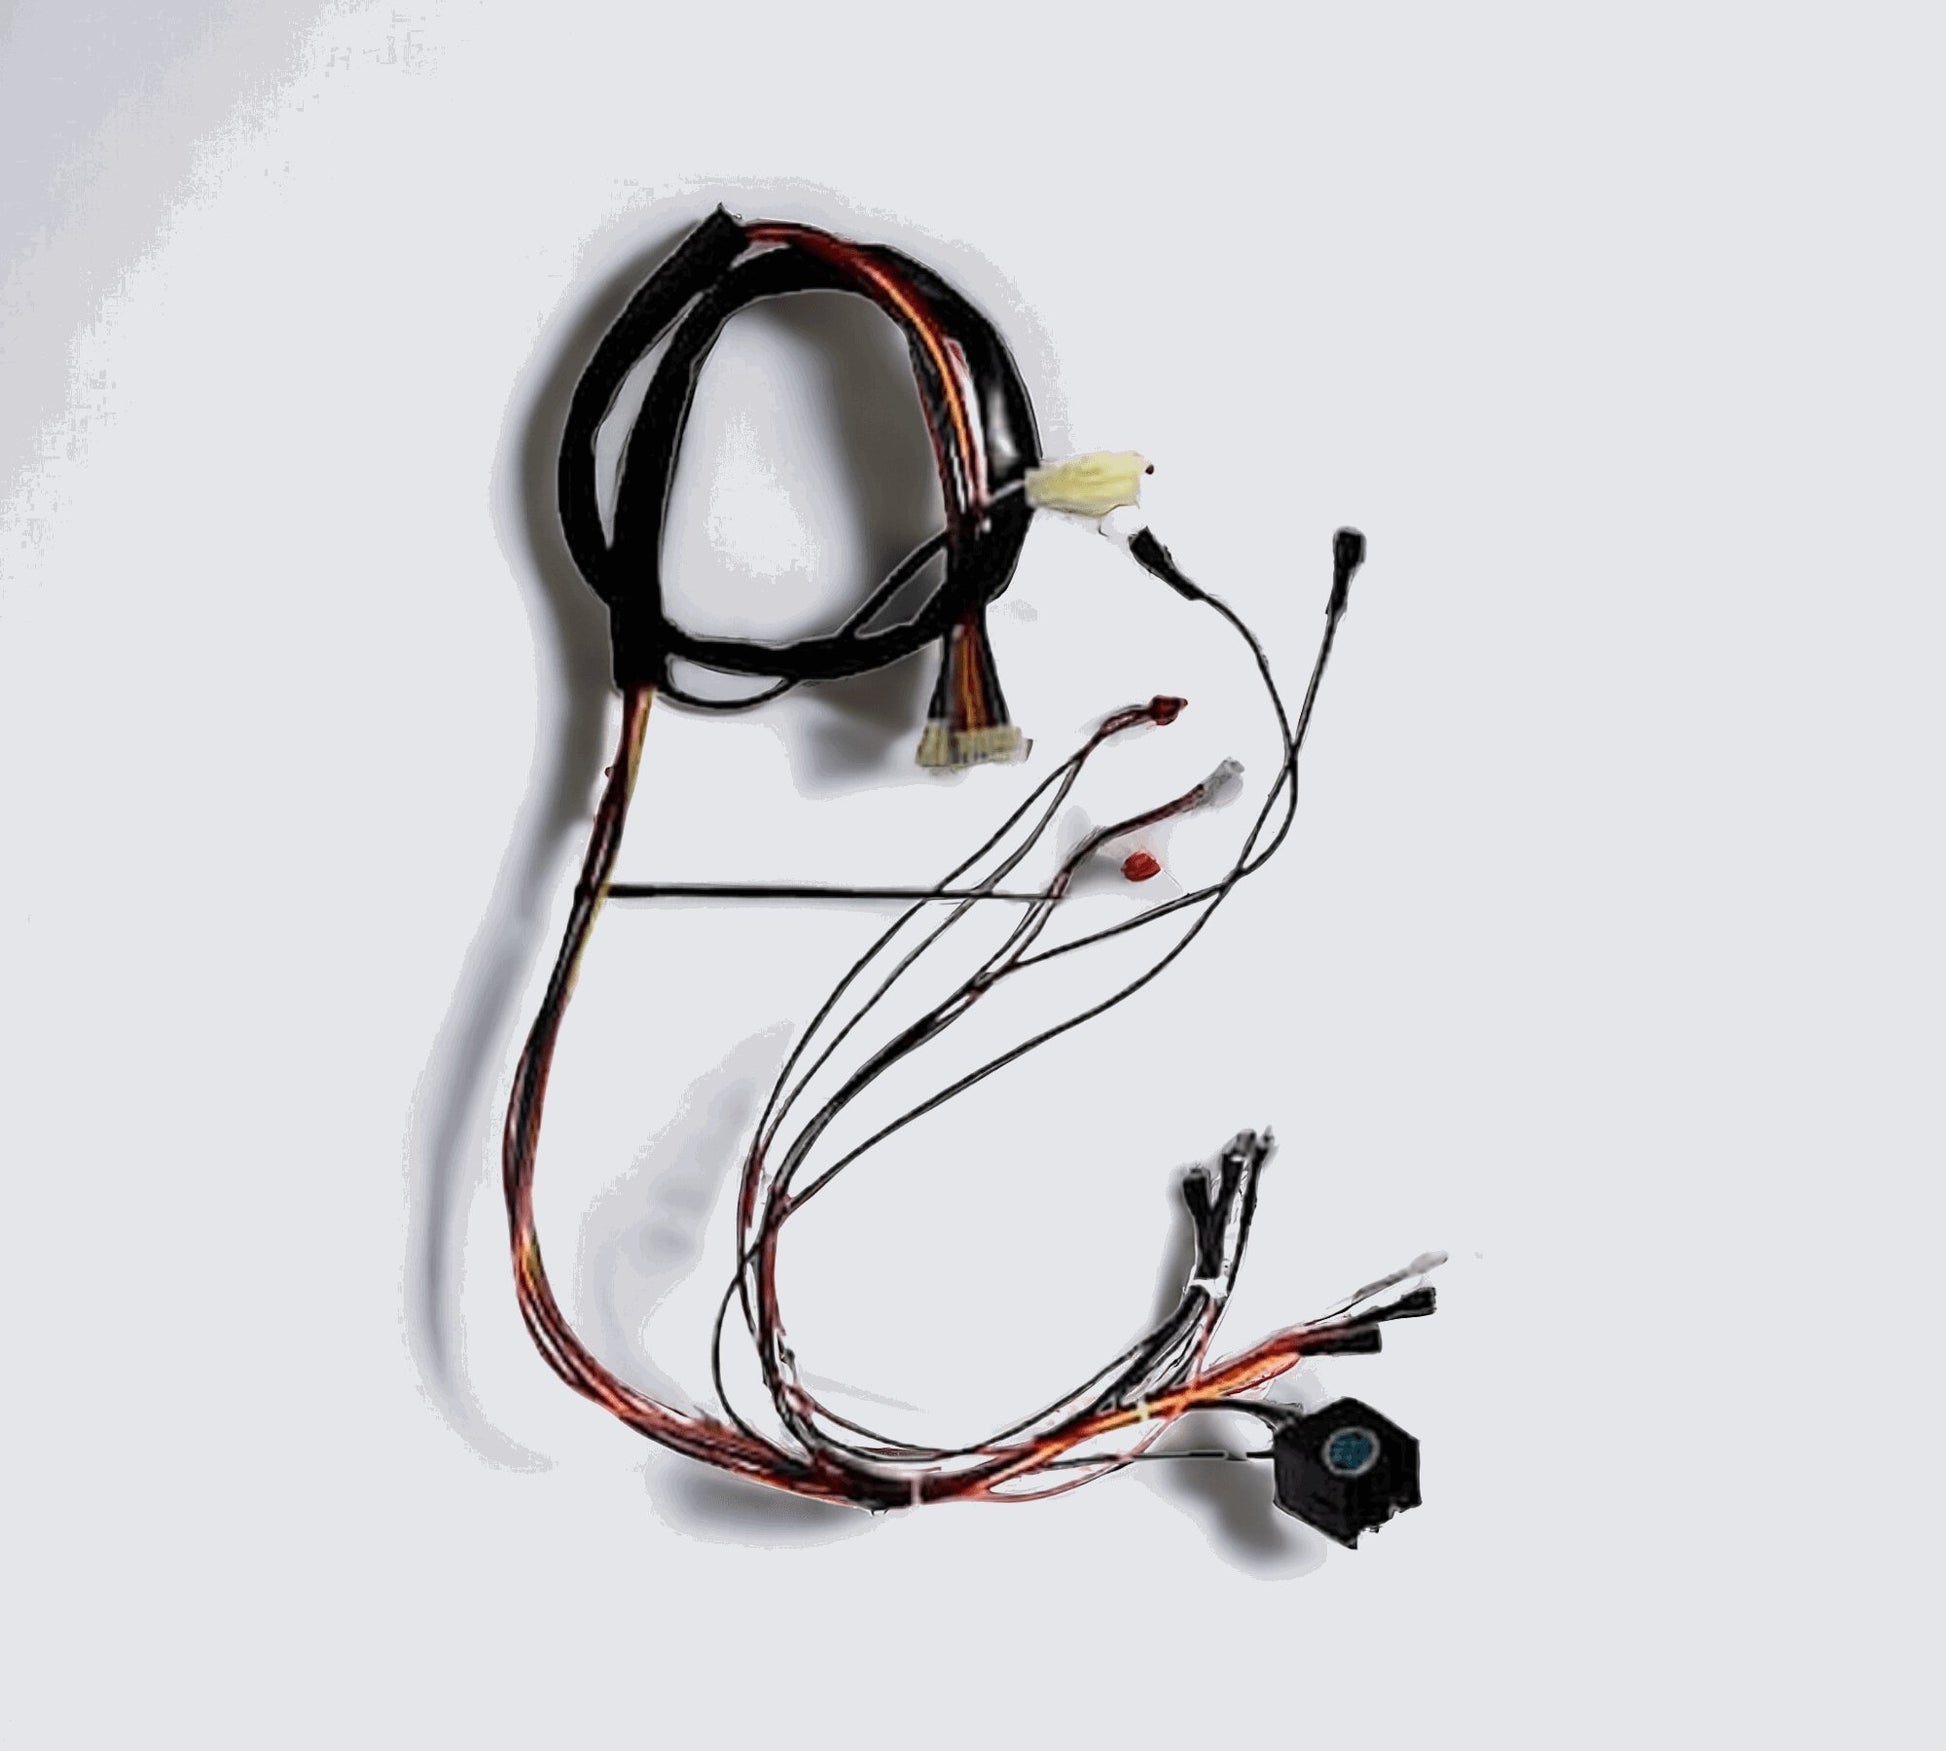 PATOYS | Full Wiring for kids bike and car replacement part - PATOYS